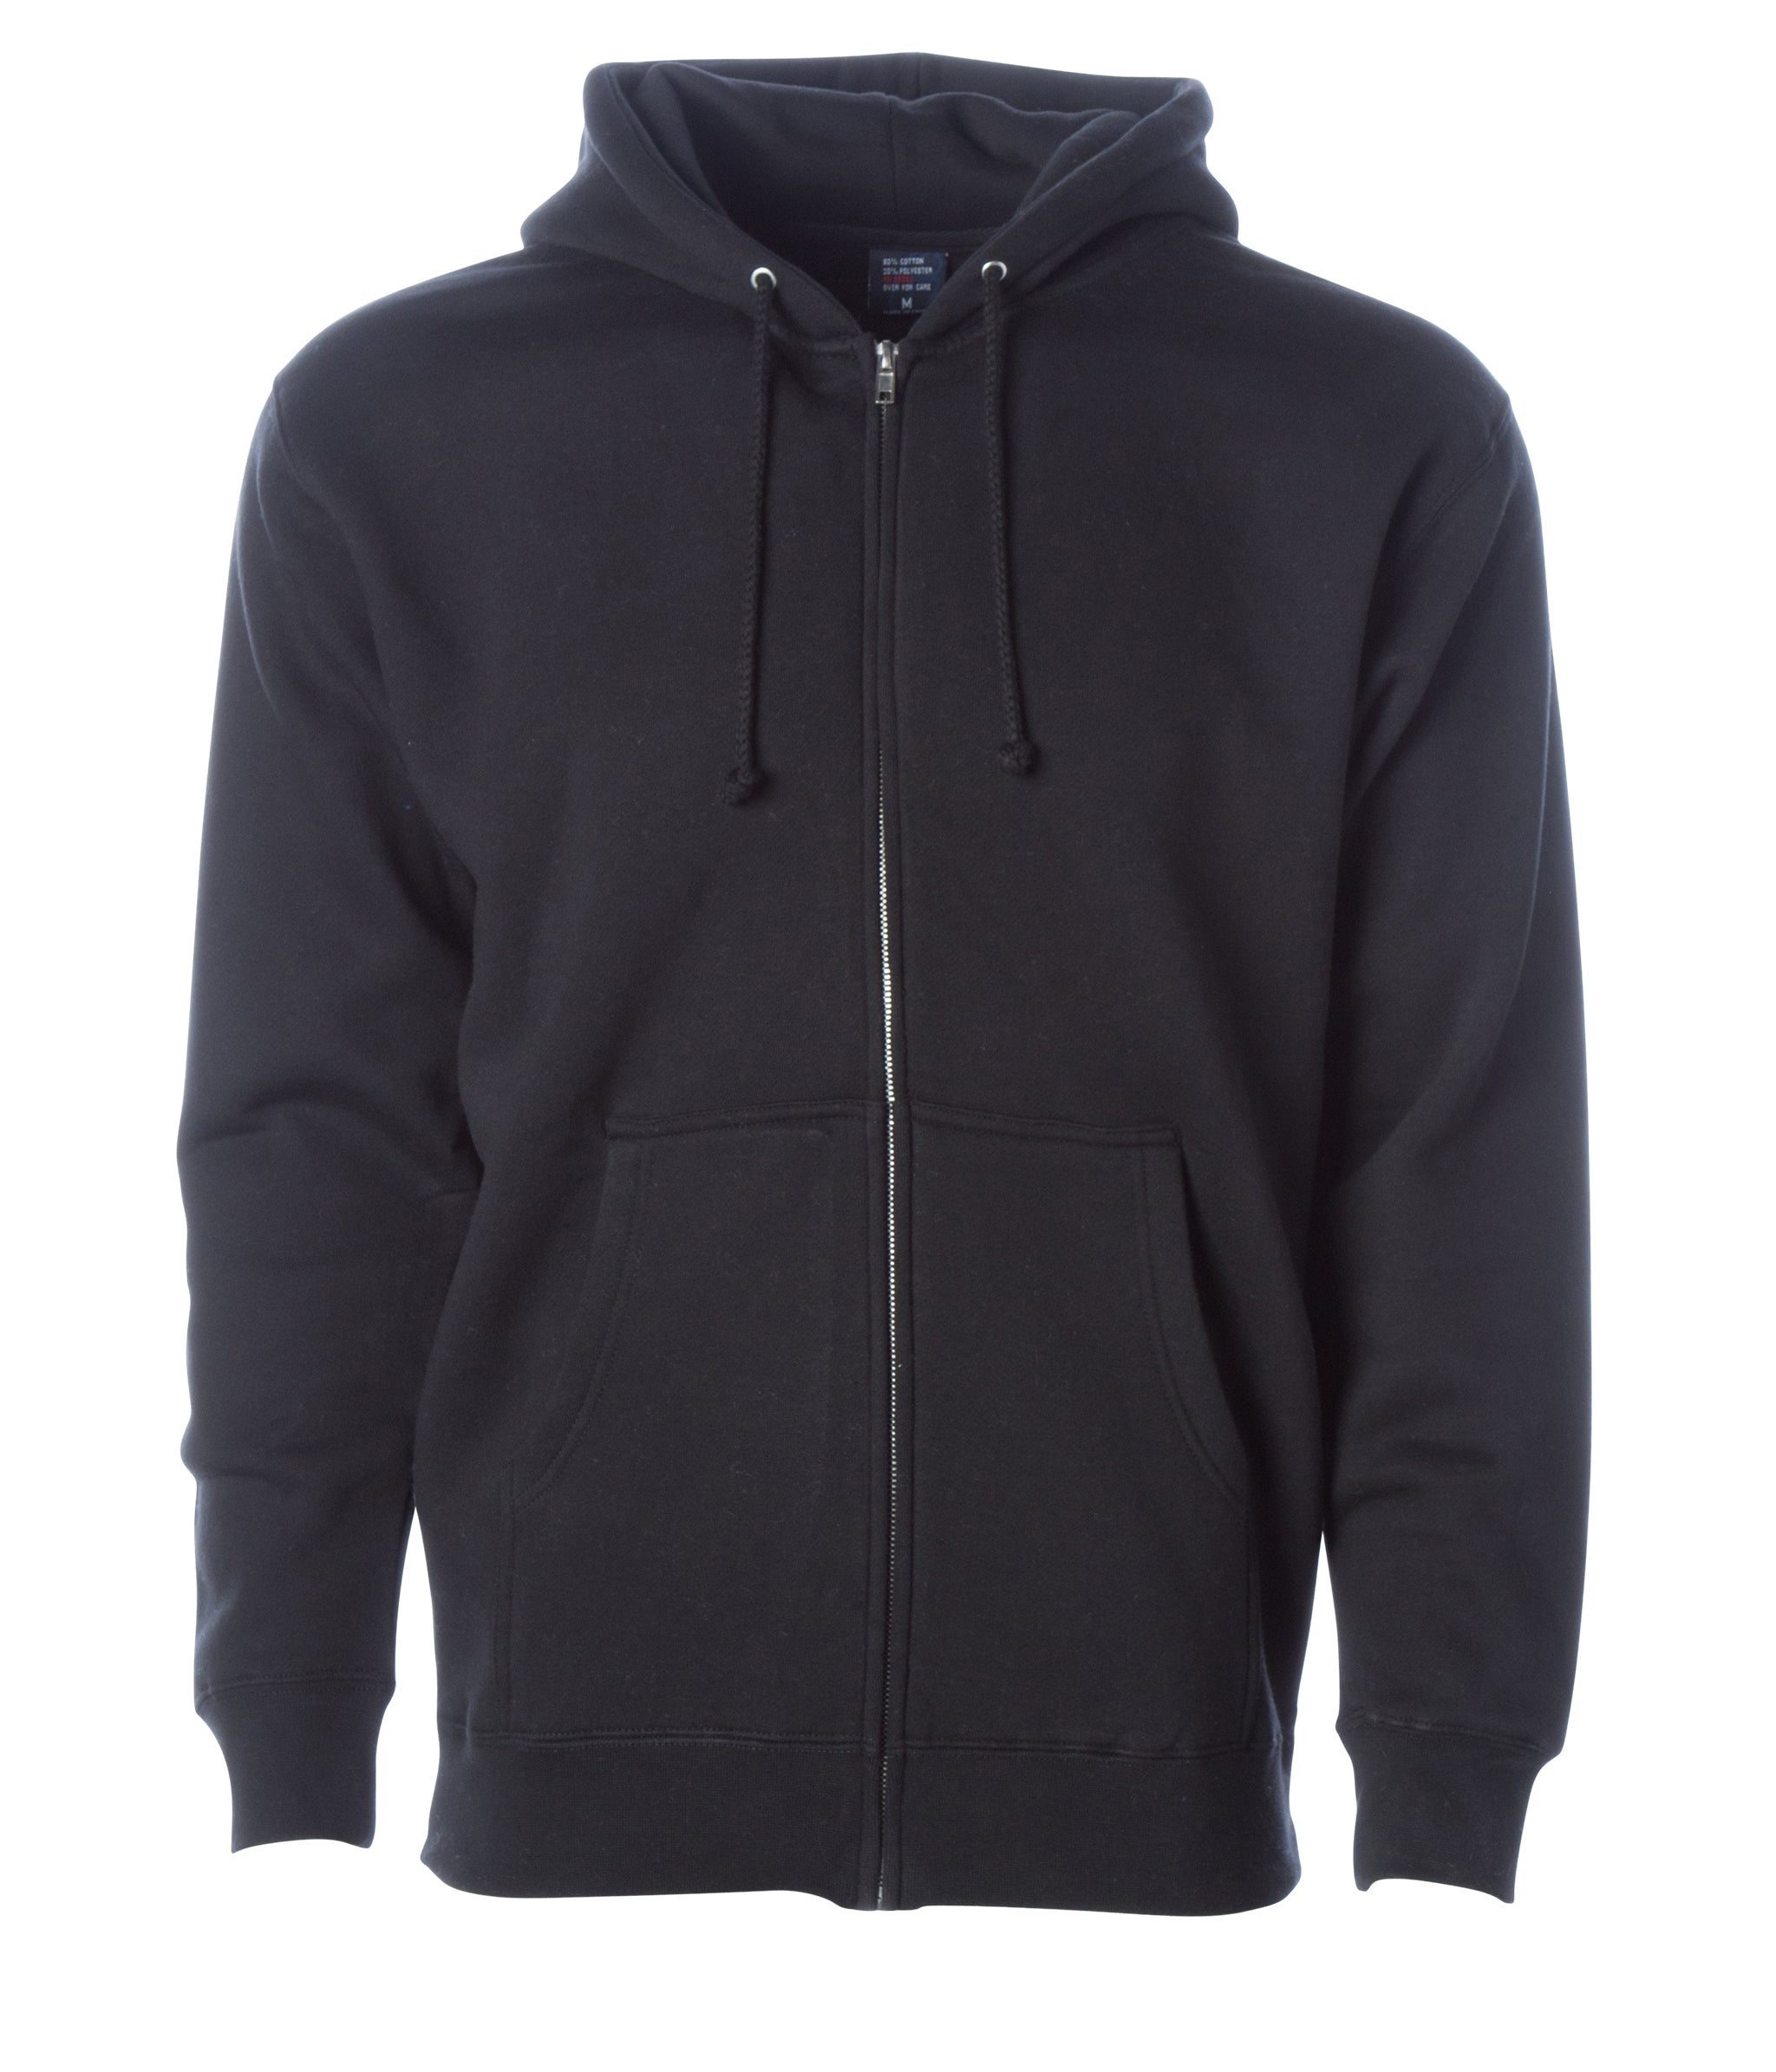 Independent Trading Co. IND4000Z Full-Zip Hooded Sweatshirt 3XL Black